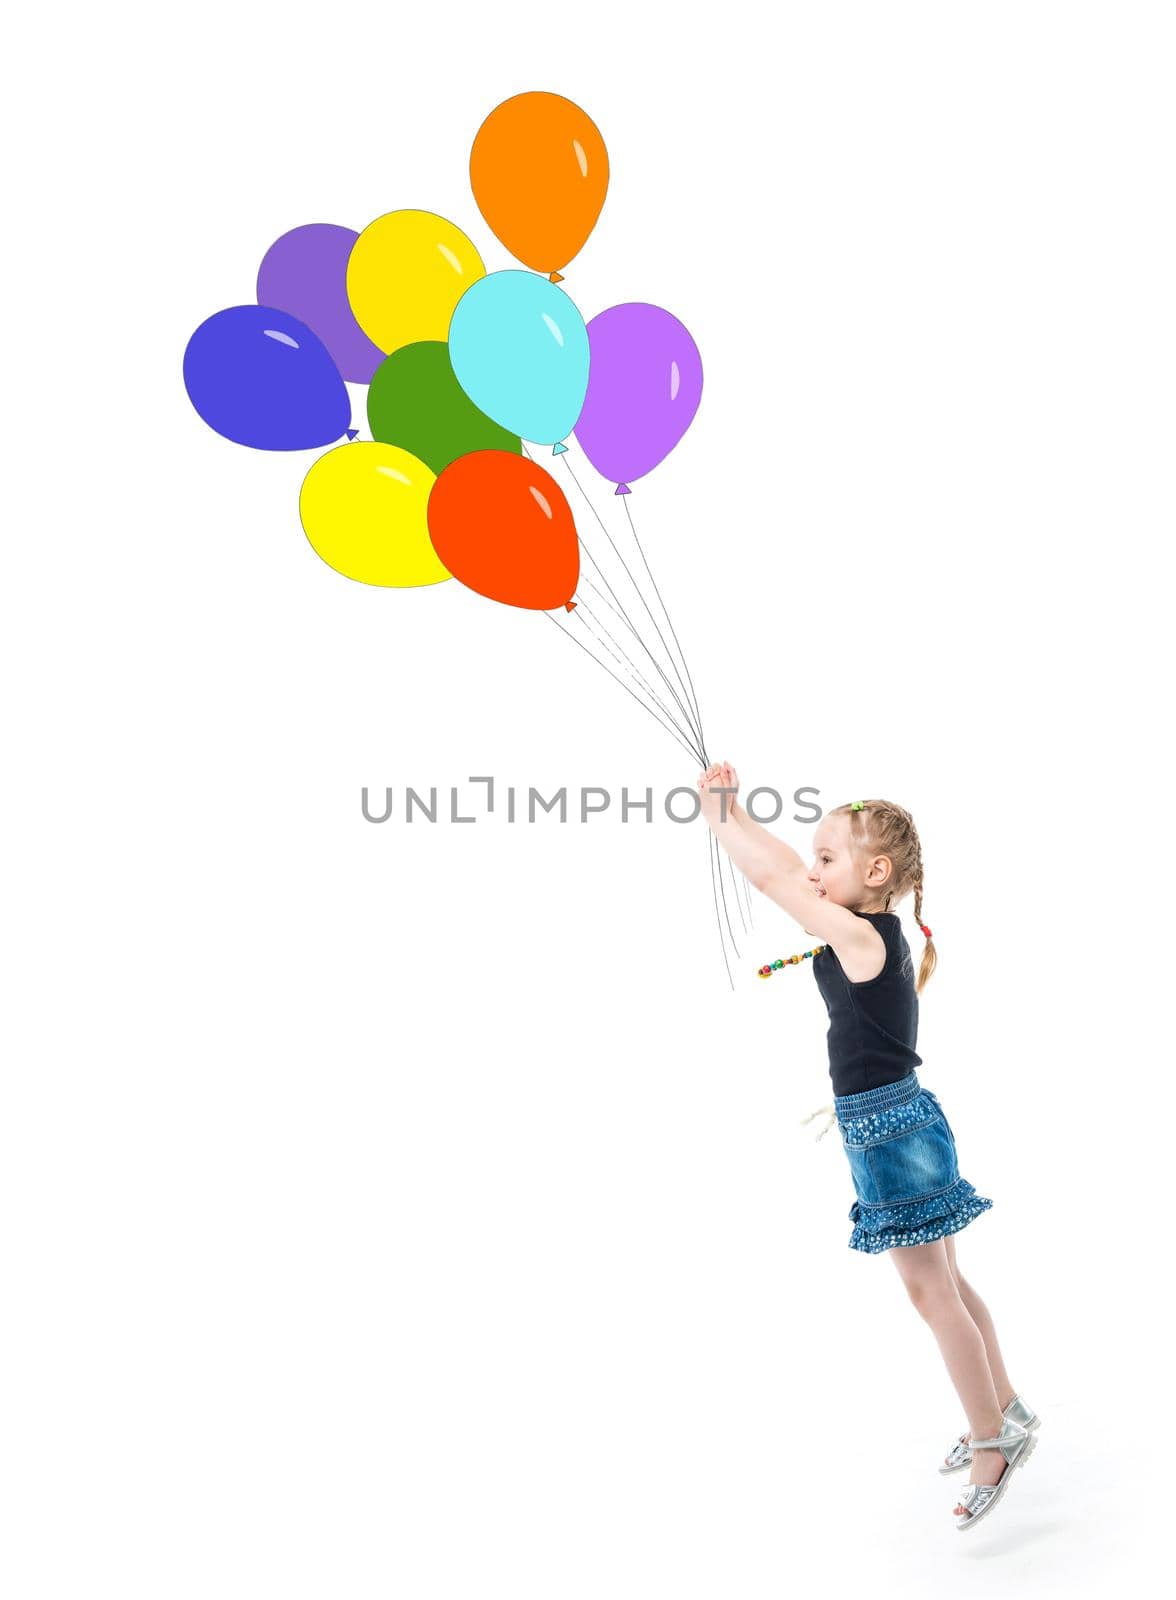 little girl jumping and reaching balloons by tan4ikk1